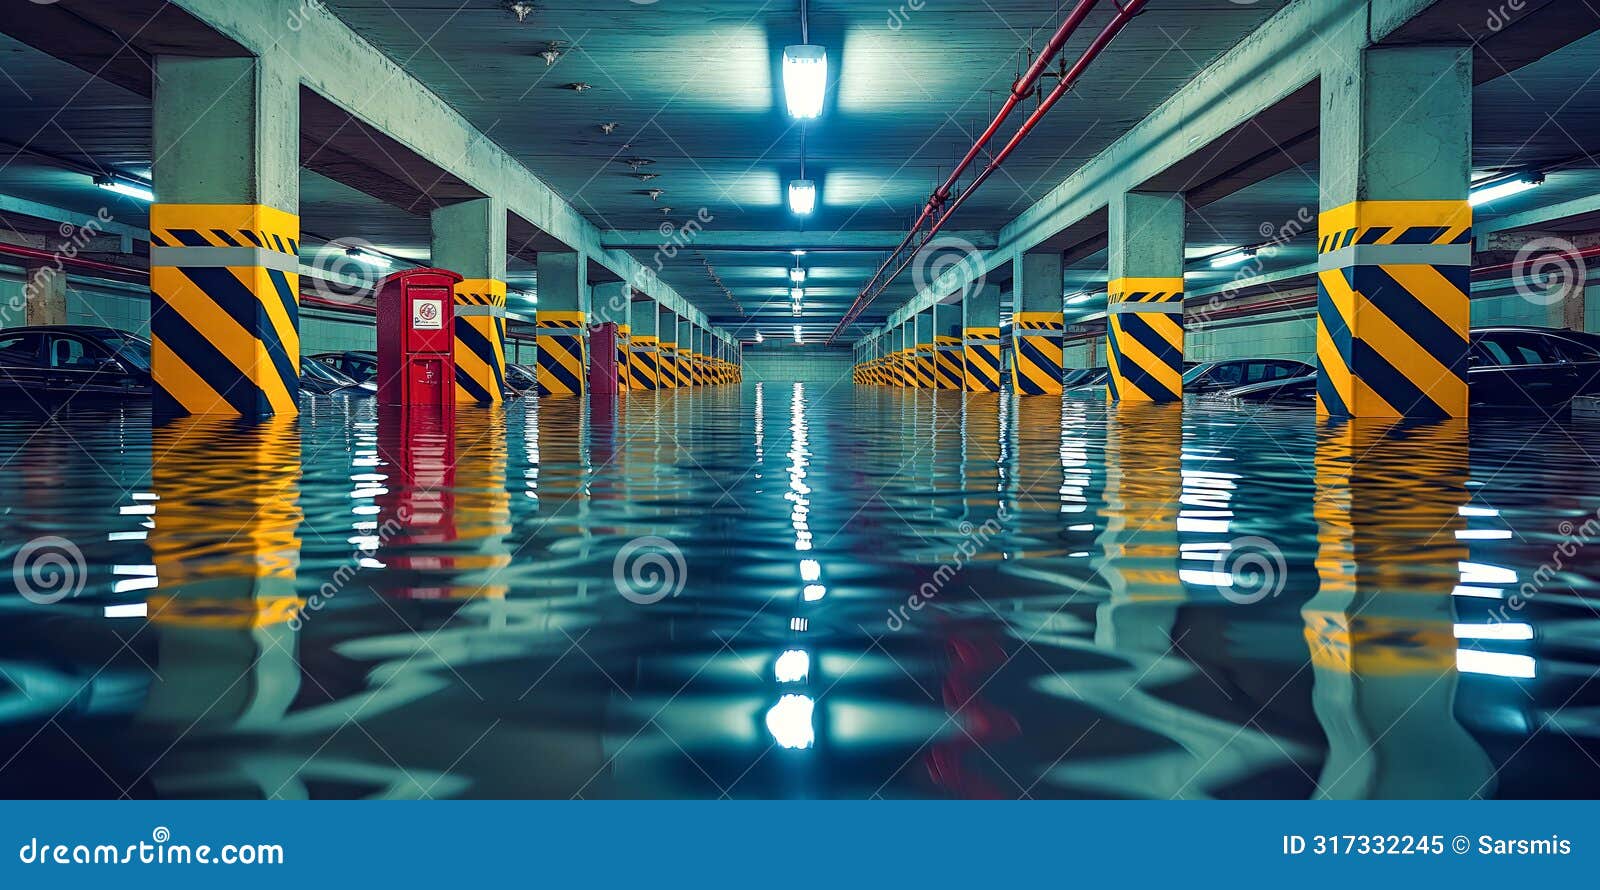 underwater parking lot. submerged cars in flooded parking. flood consequences. concept climat change